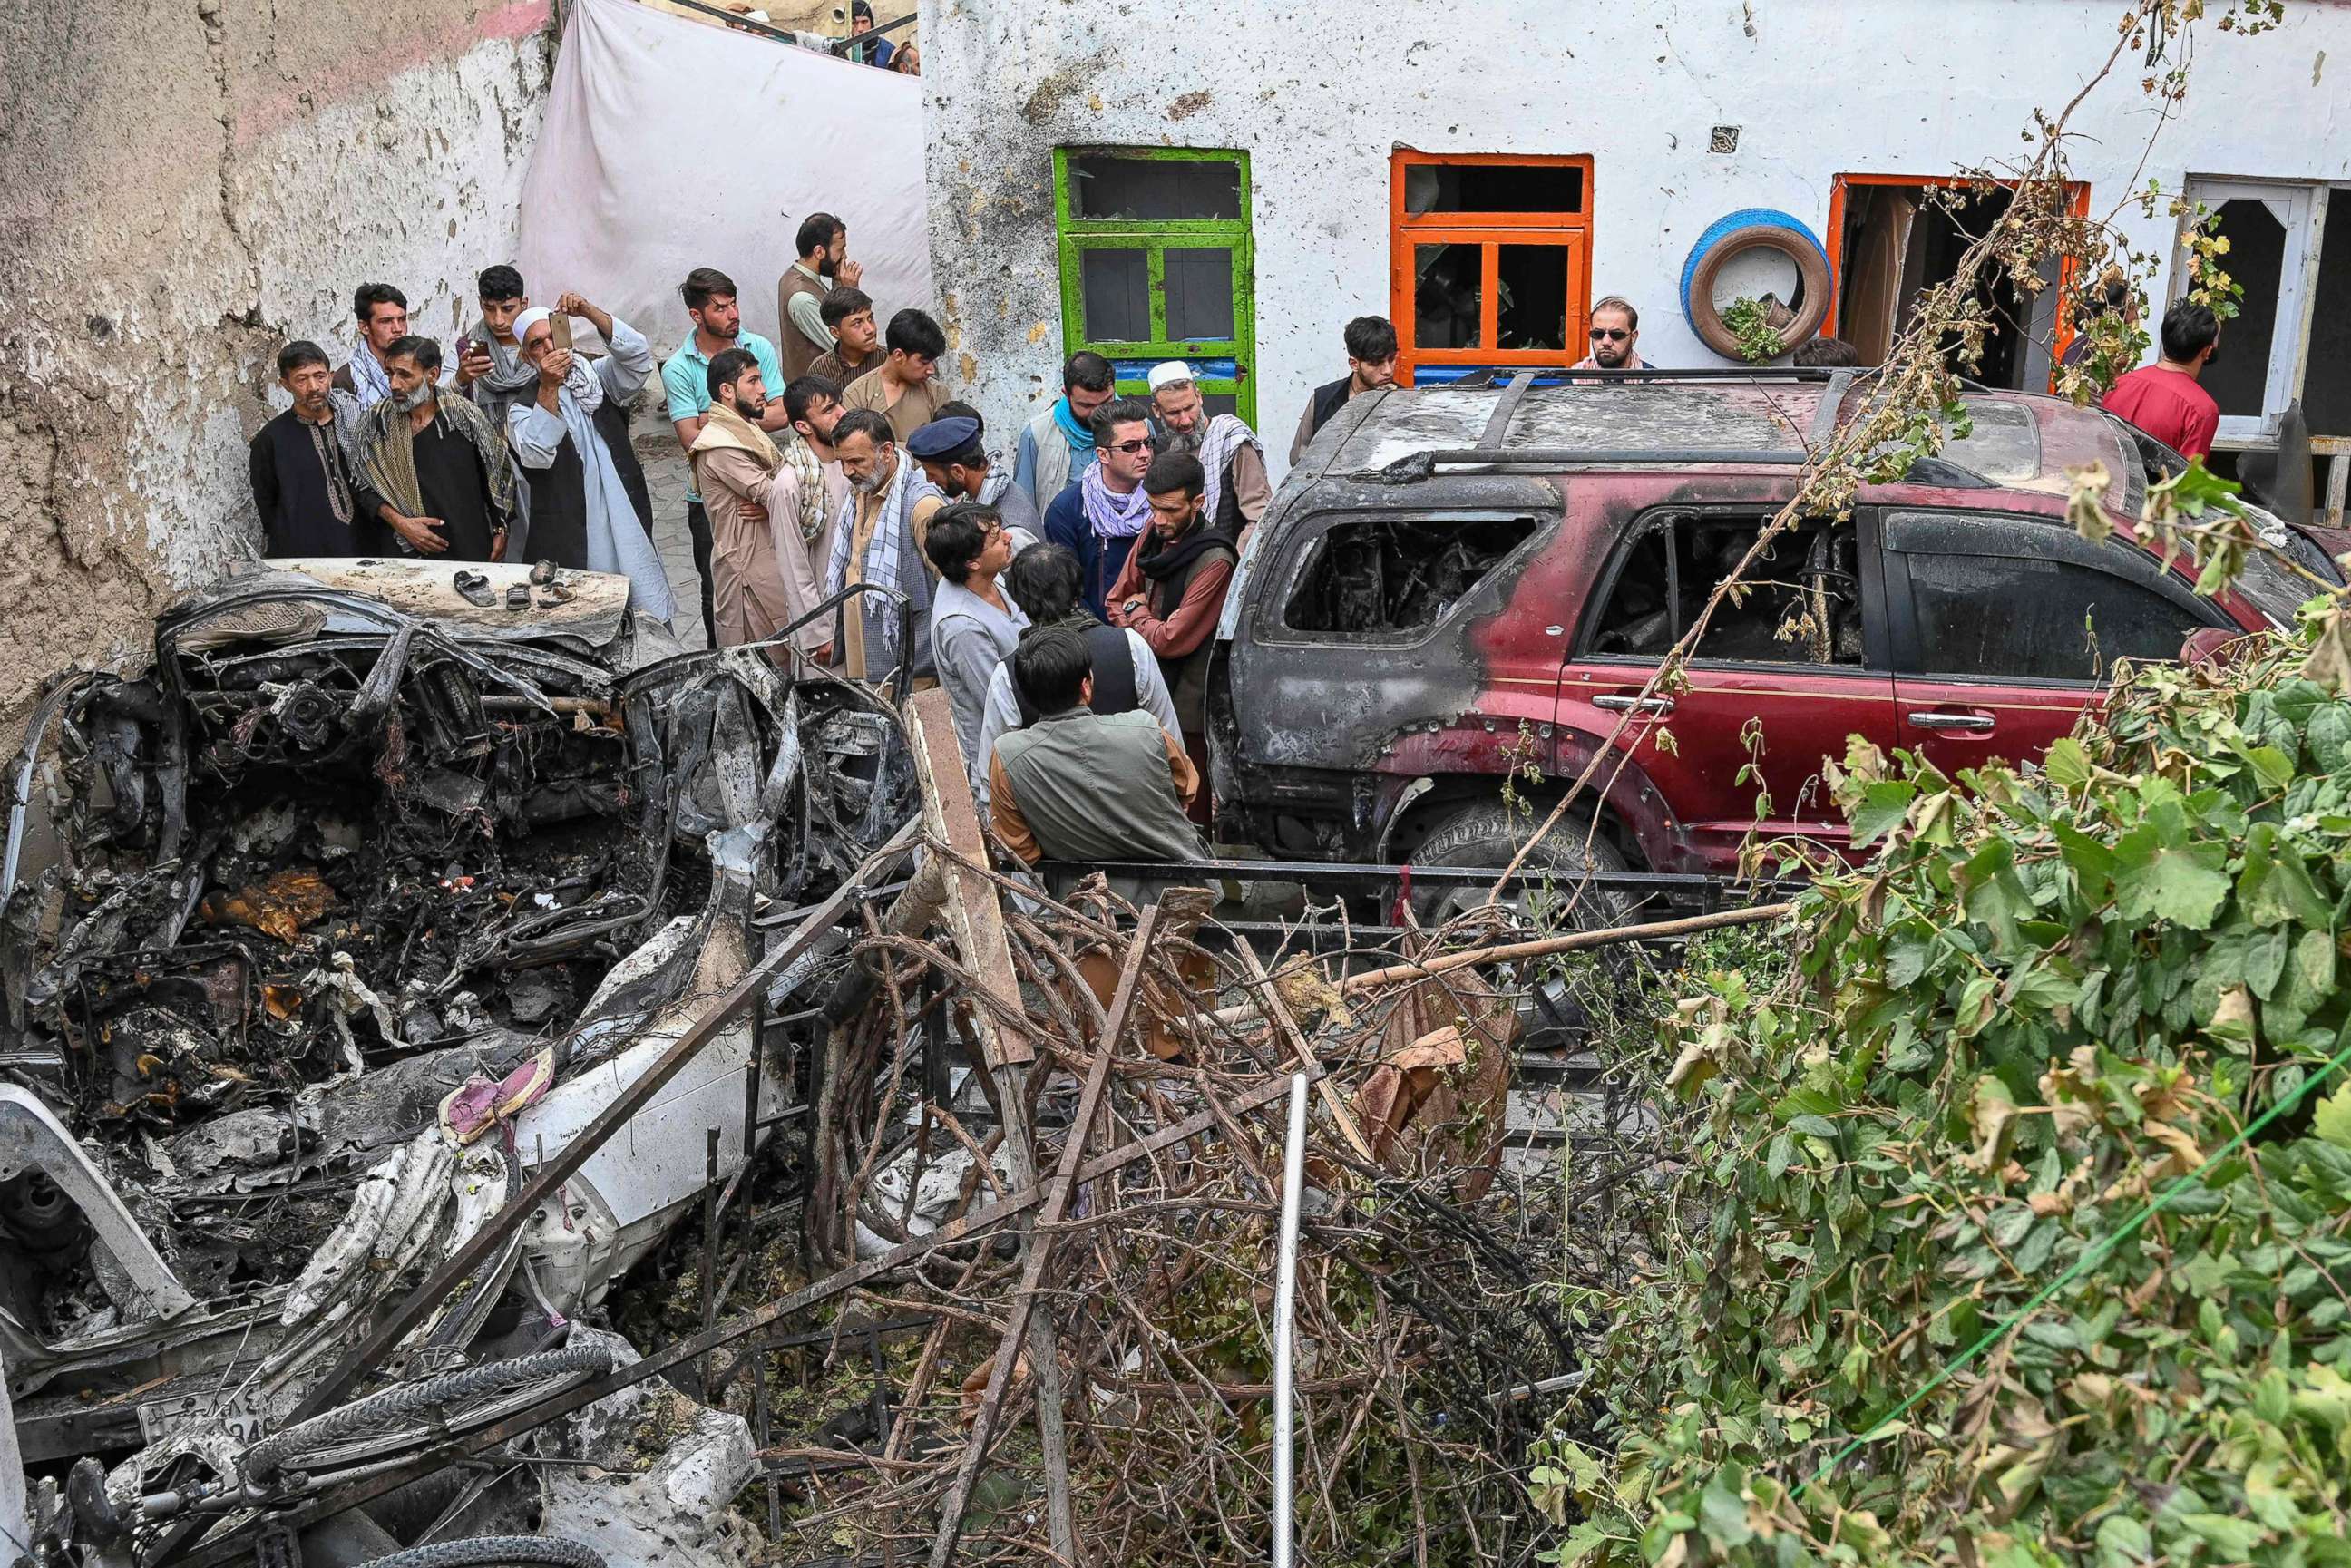 PHOTO: Afghan residents gather next to a damaged vehicle a day after a U.S. drone airstrike in Kabul on Aug. 30, 2021. 